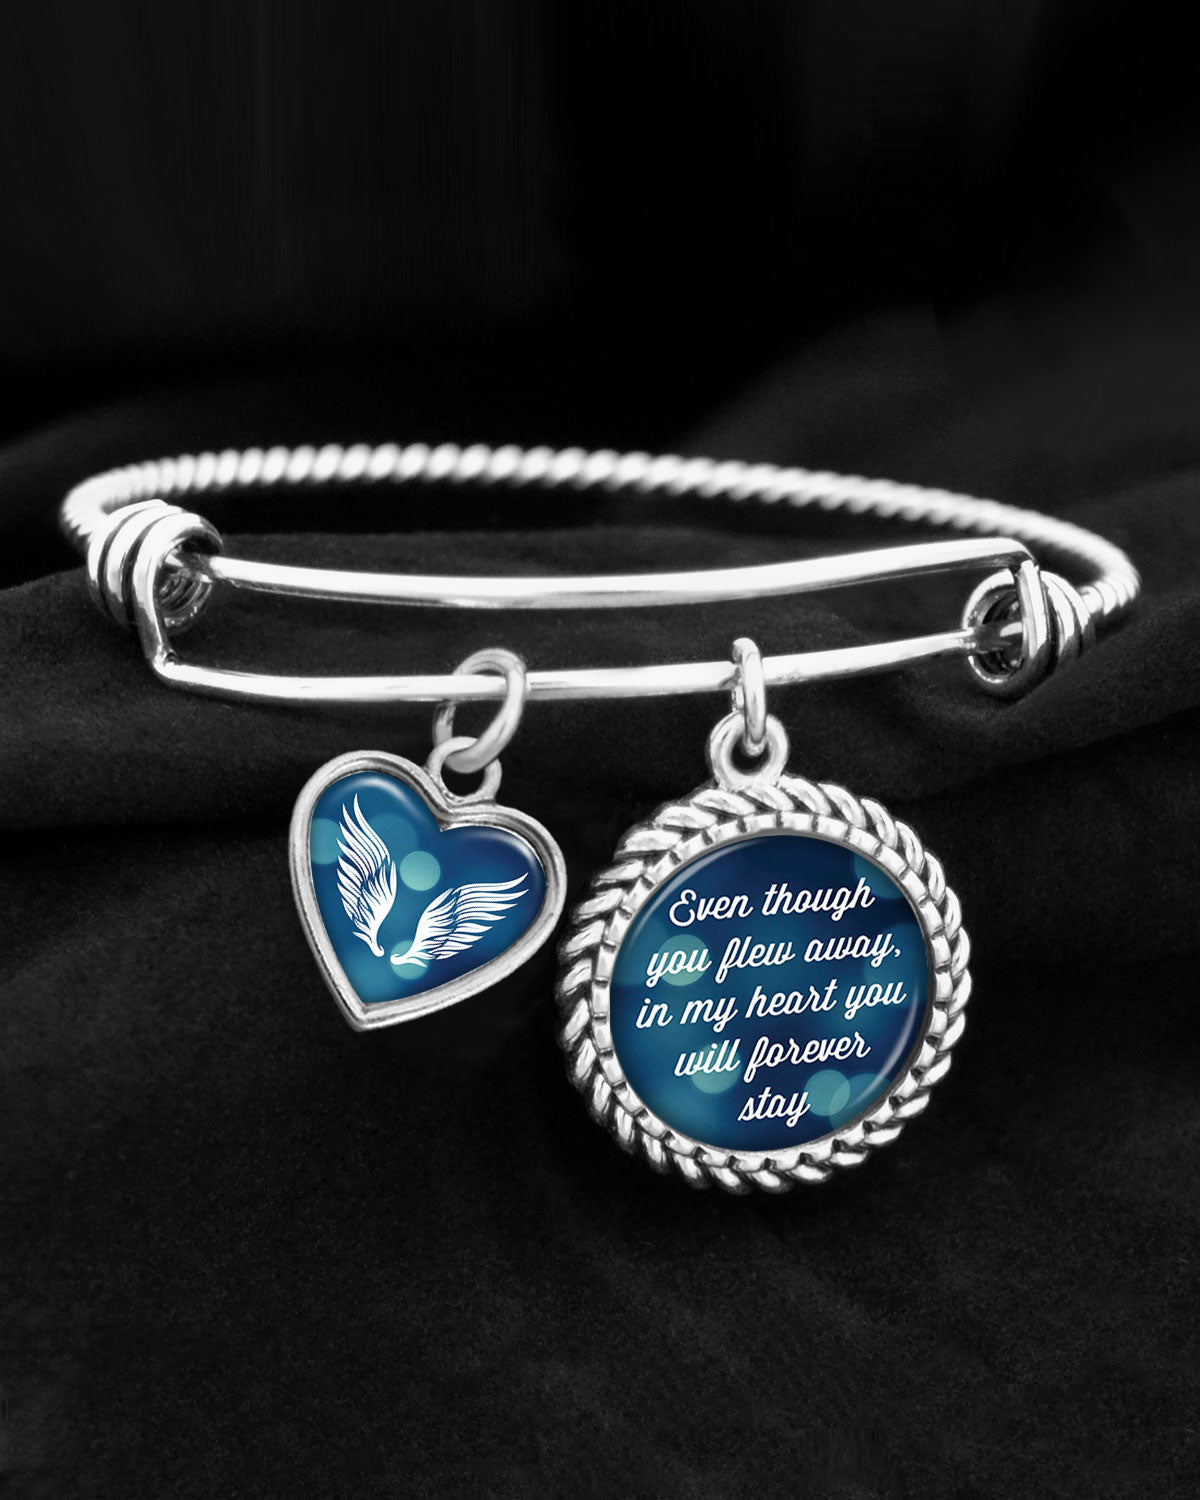 In My Heart You Will Forever Stay Charm Bracelet